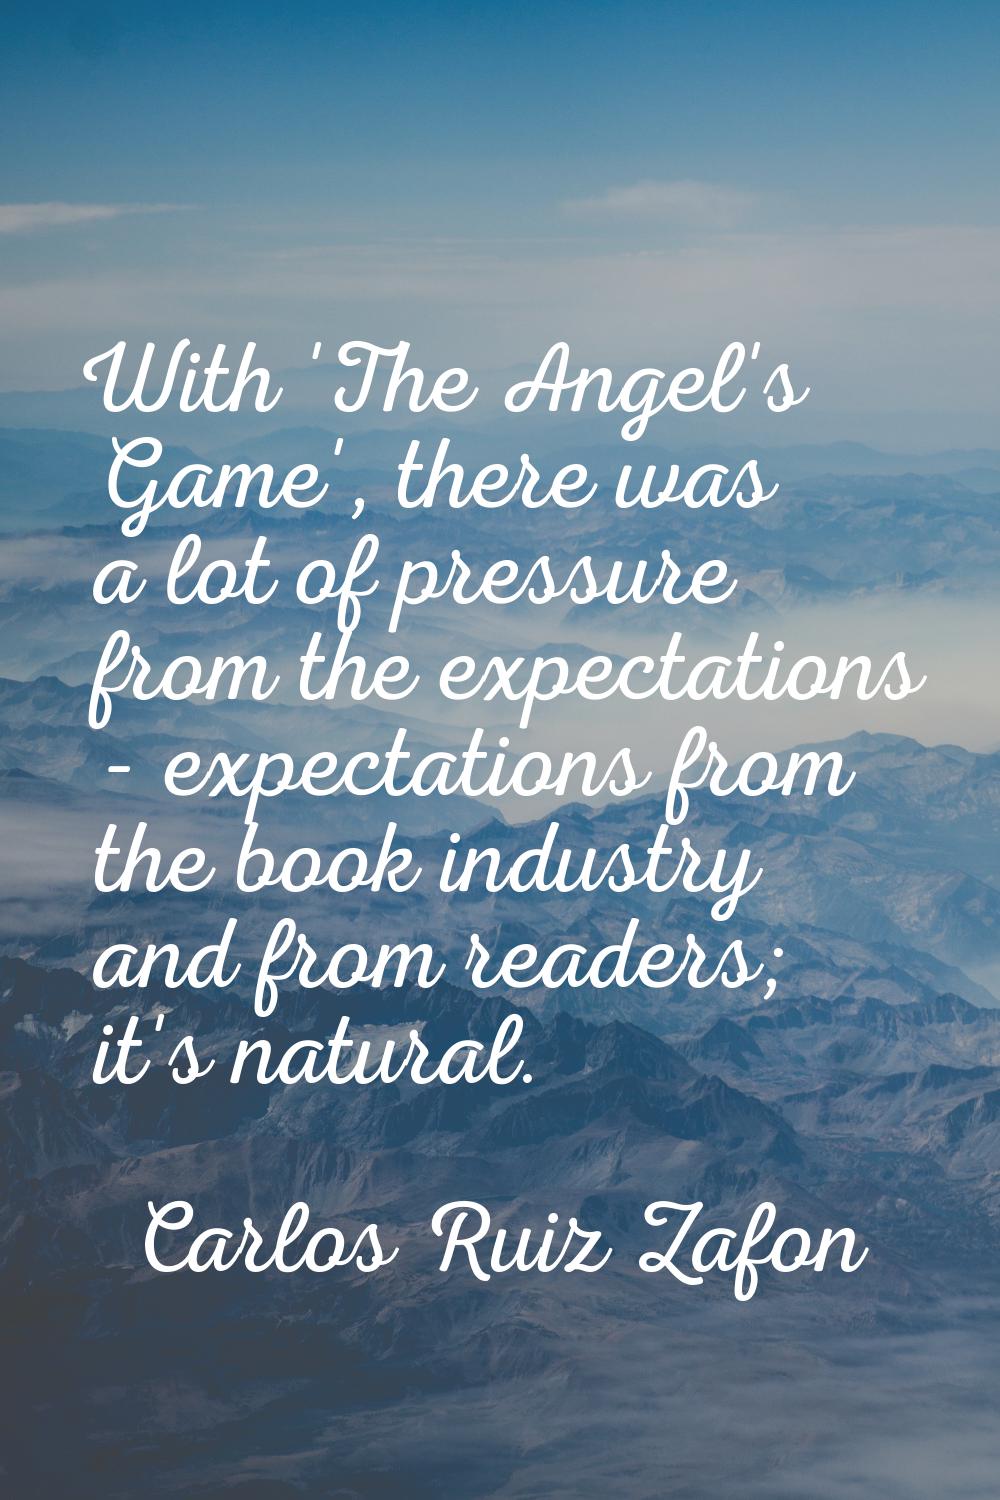 With 'The Angel's Game', there was a lot of pressure from the expectations - expectations from the 